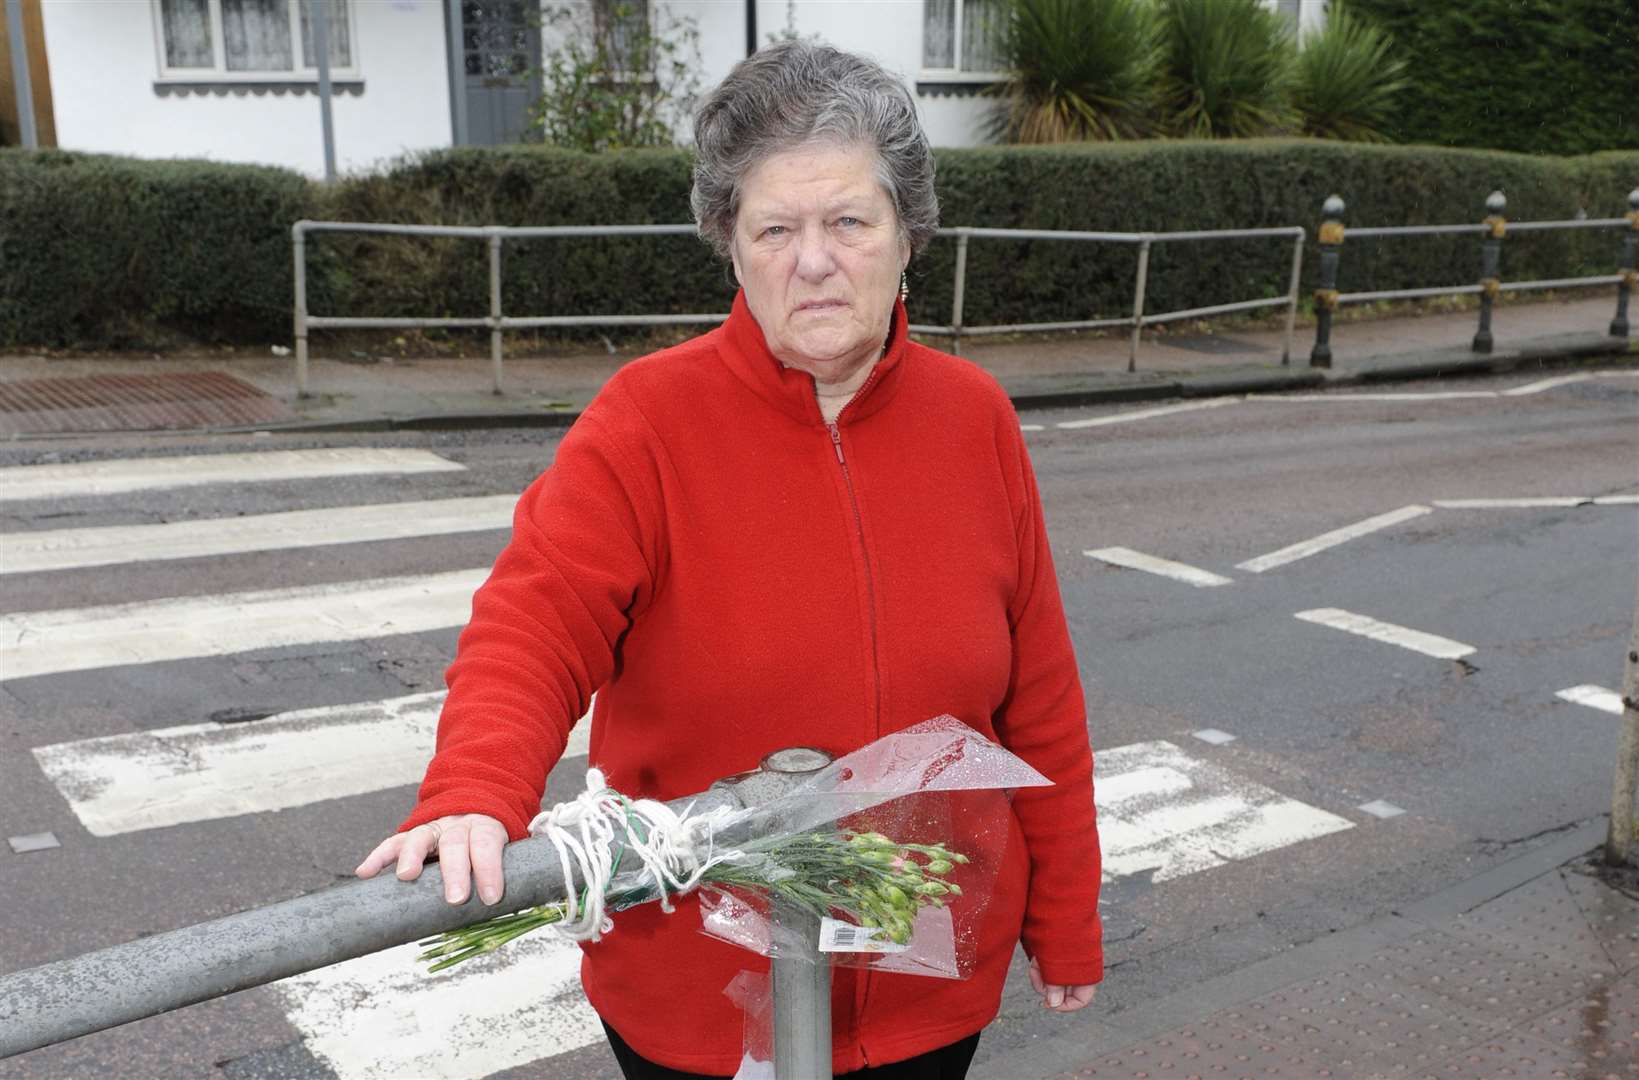 Doreen Taylor collected more than 1,000 signatures to make the crossing safer. Picture: Tony Flashman